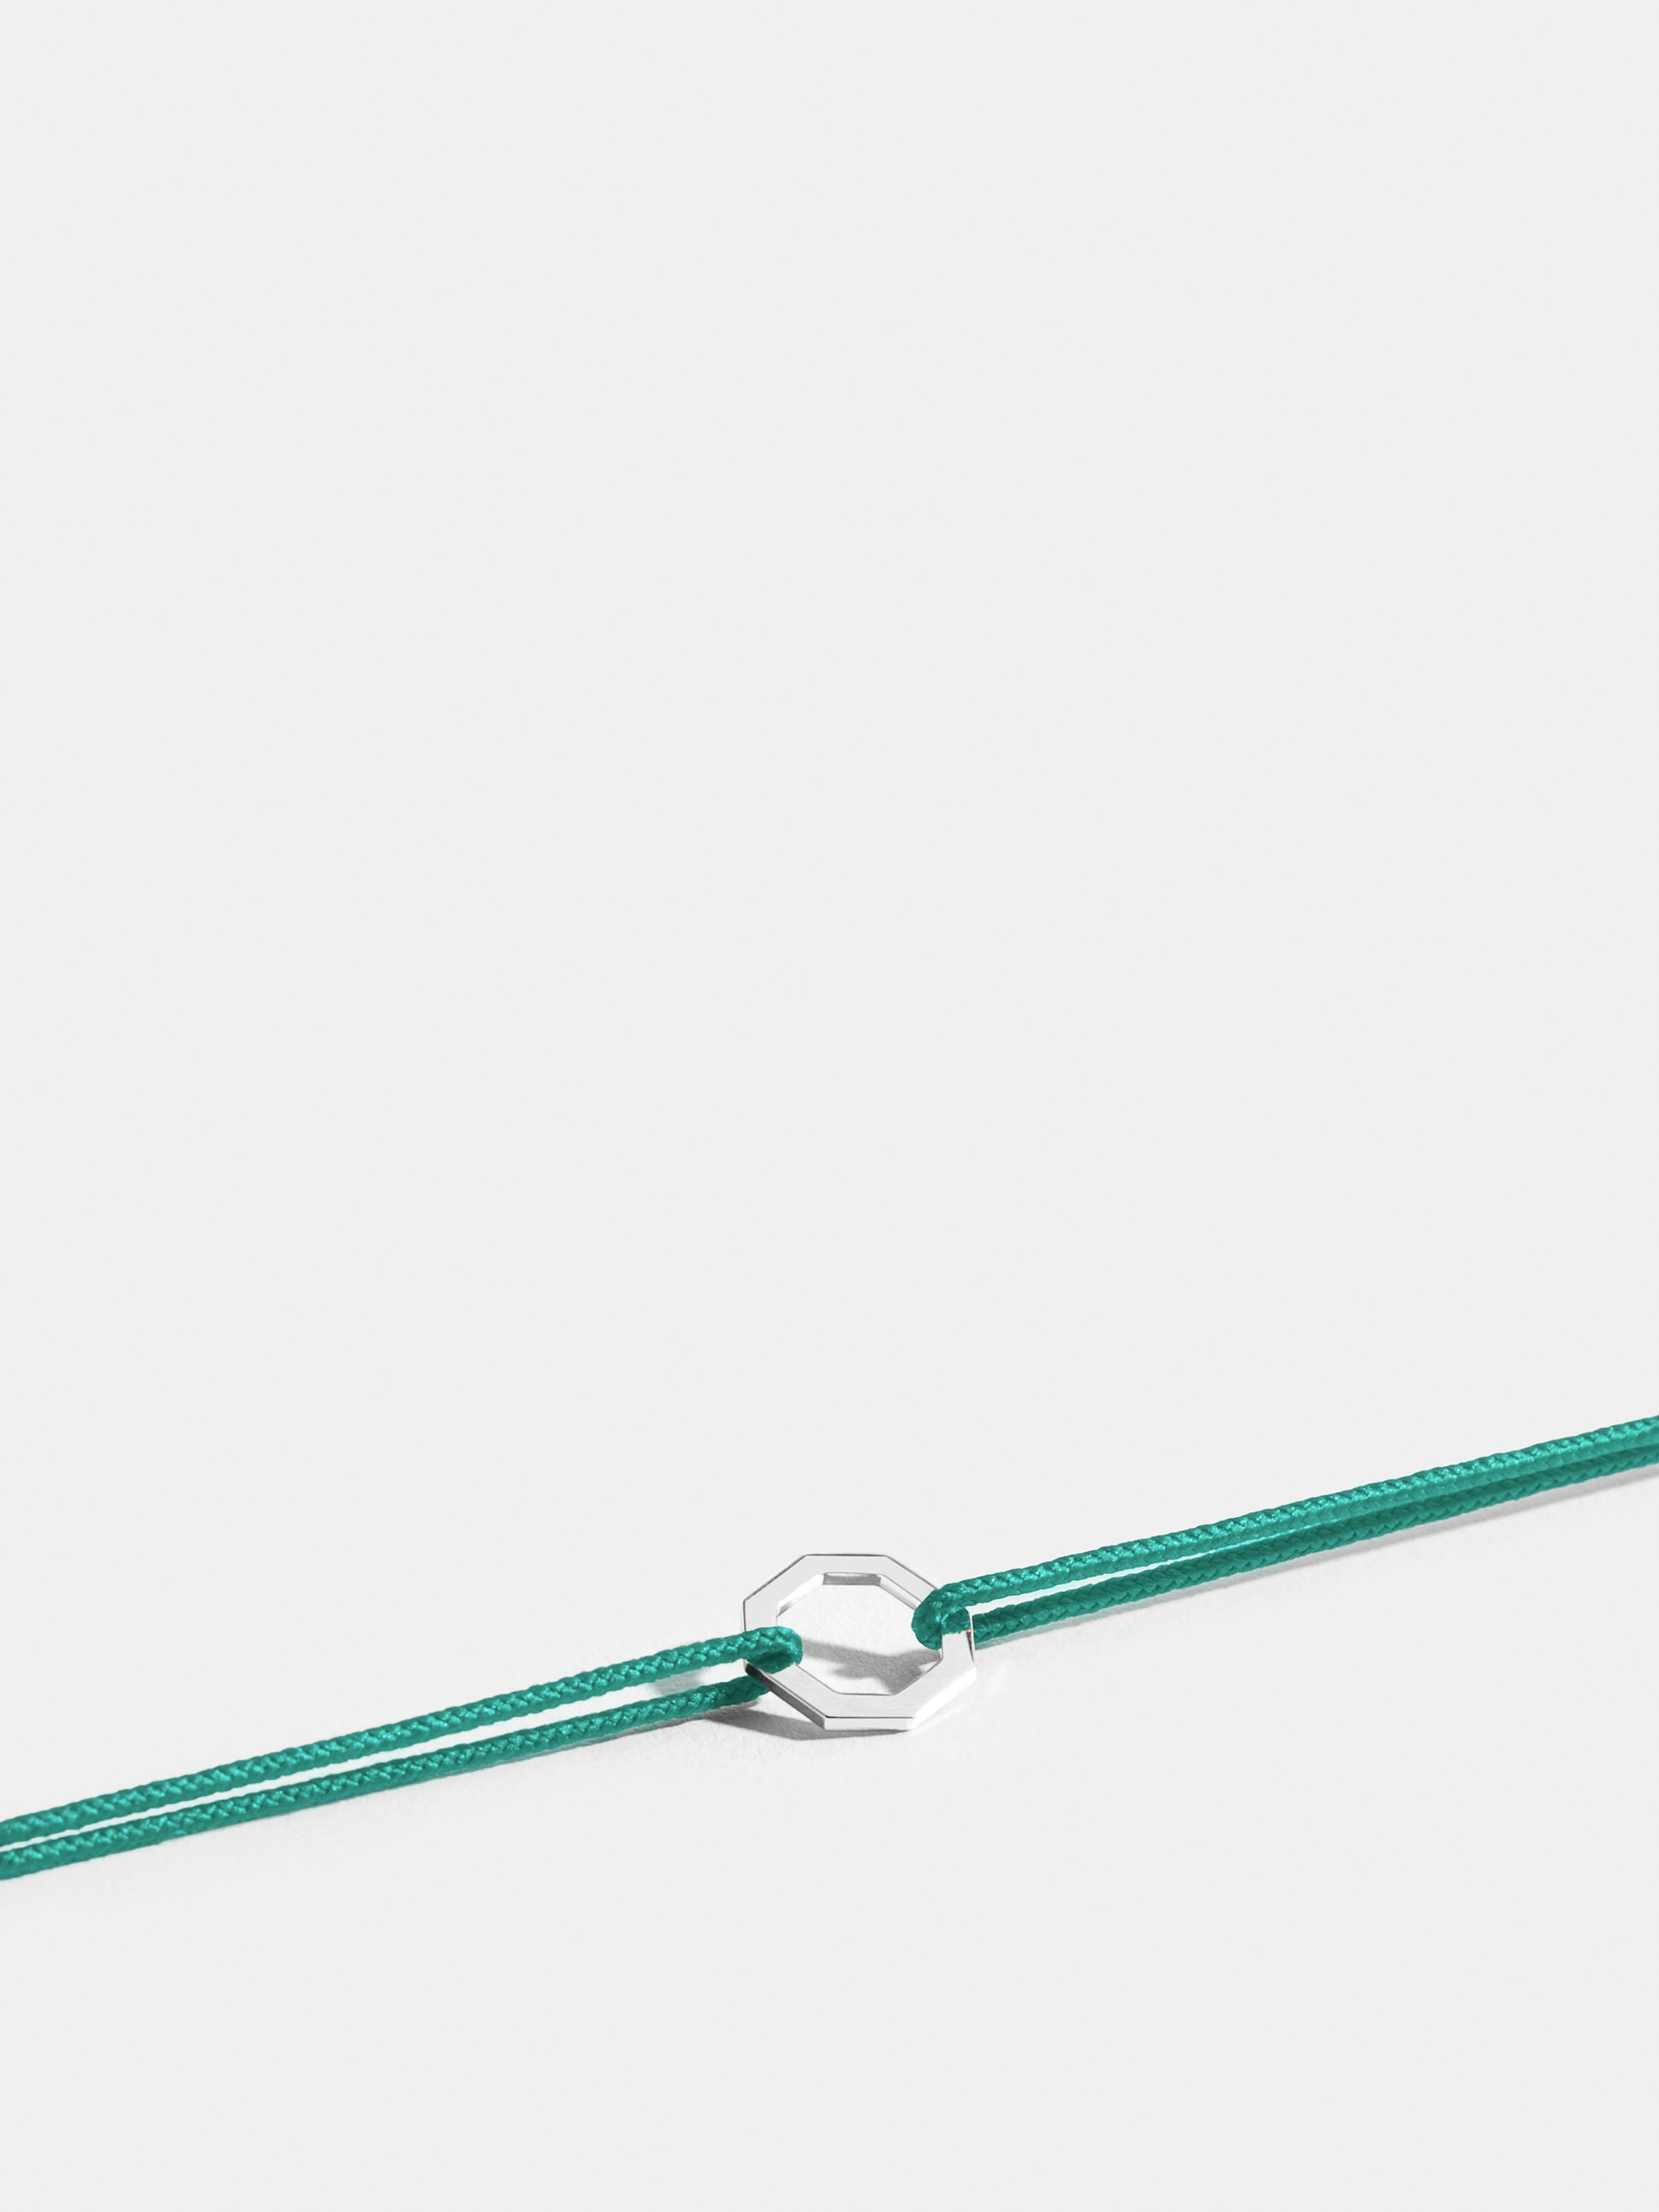 Octogone motif in 18k Fairmined ethical white gold, on a turquoise blue cord. 